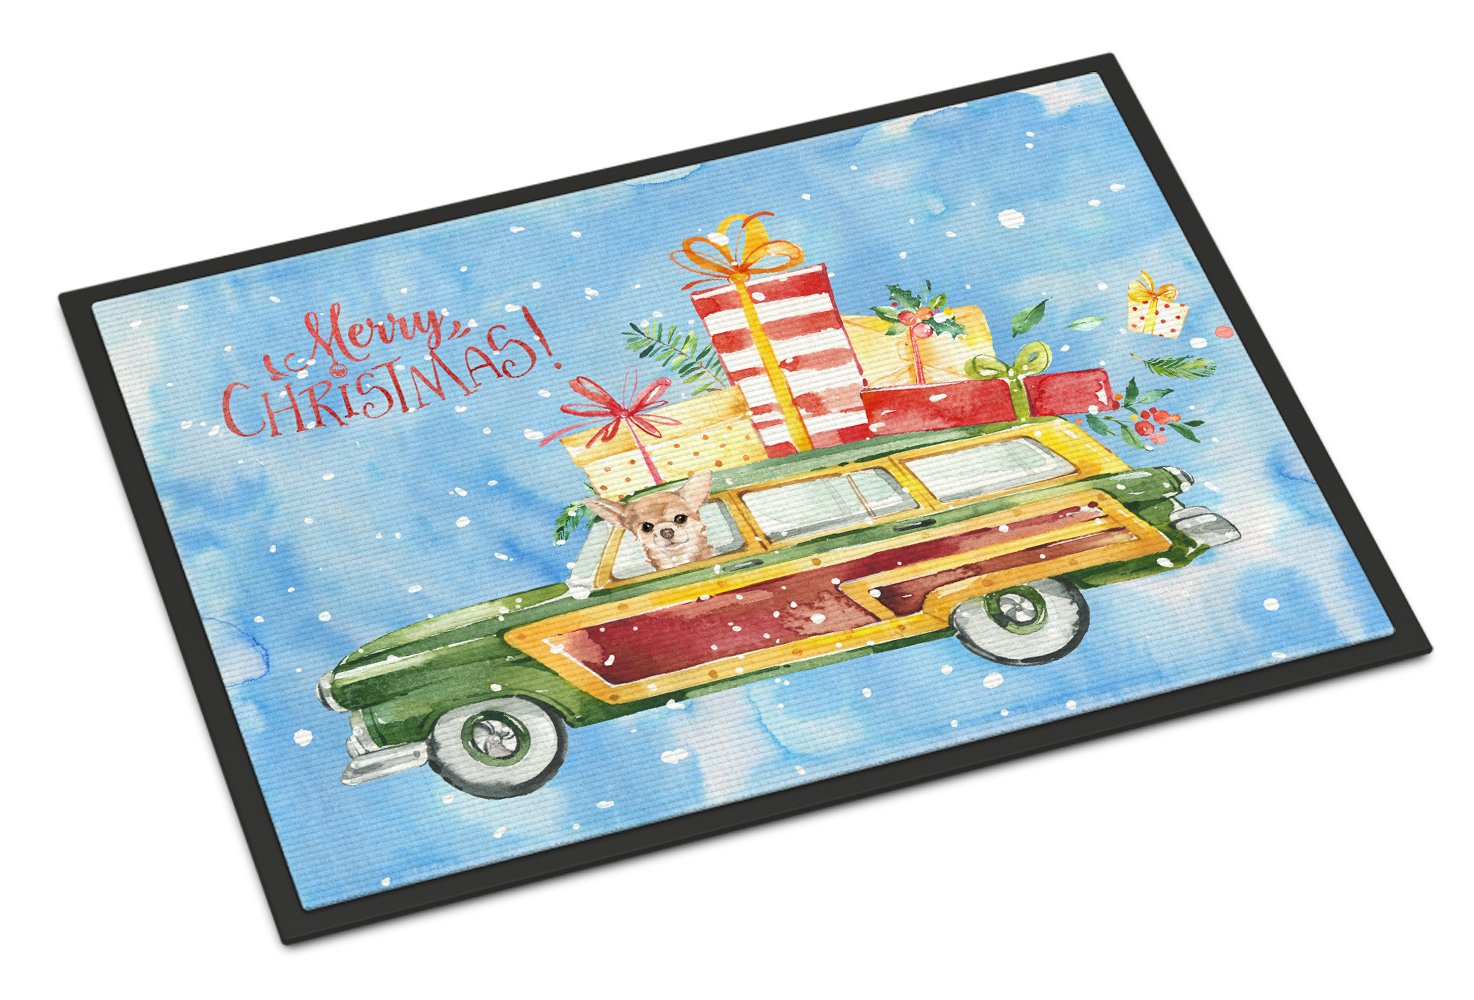 Merry Christmas Chihuahua Indoor or Outdoor Mat 24x36 CK2449JMAT by Caroline's Treasures